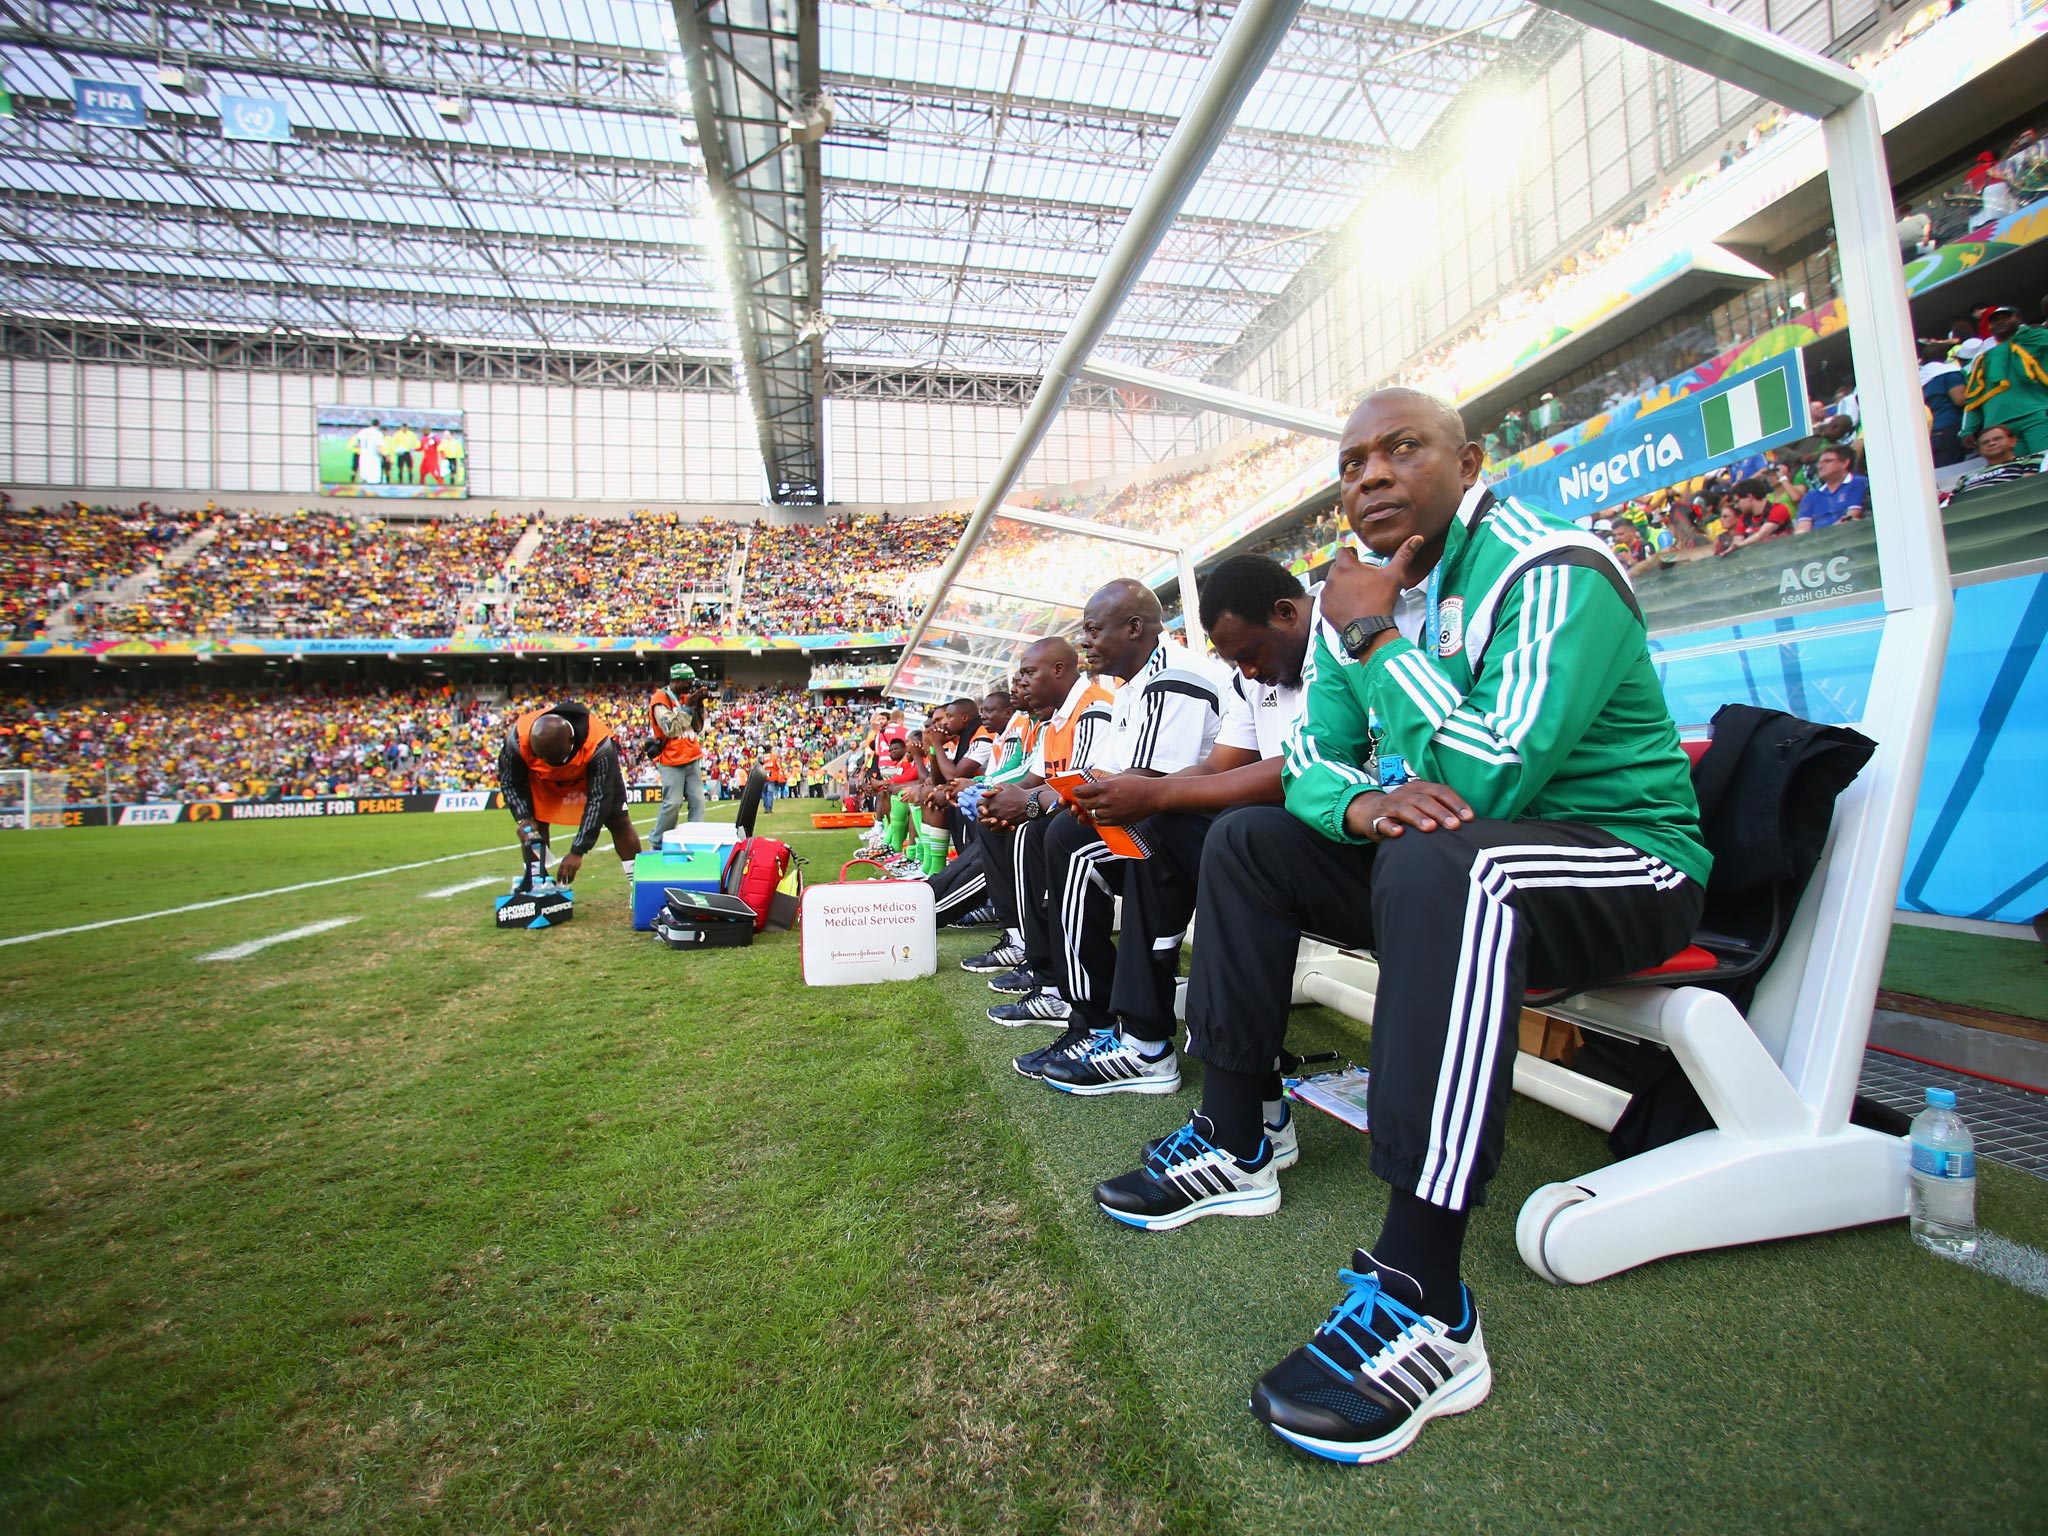 Stephen Keshi, the Nigeria coach, watches his side get
held to a draw by Iran